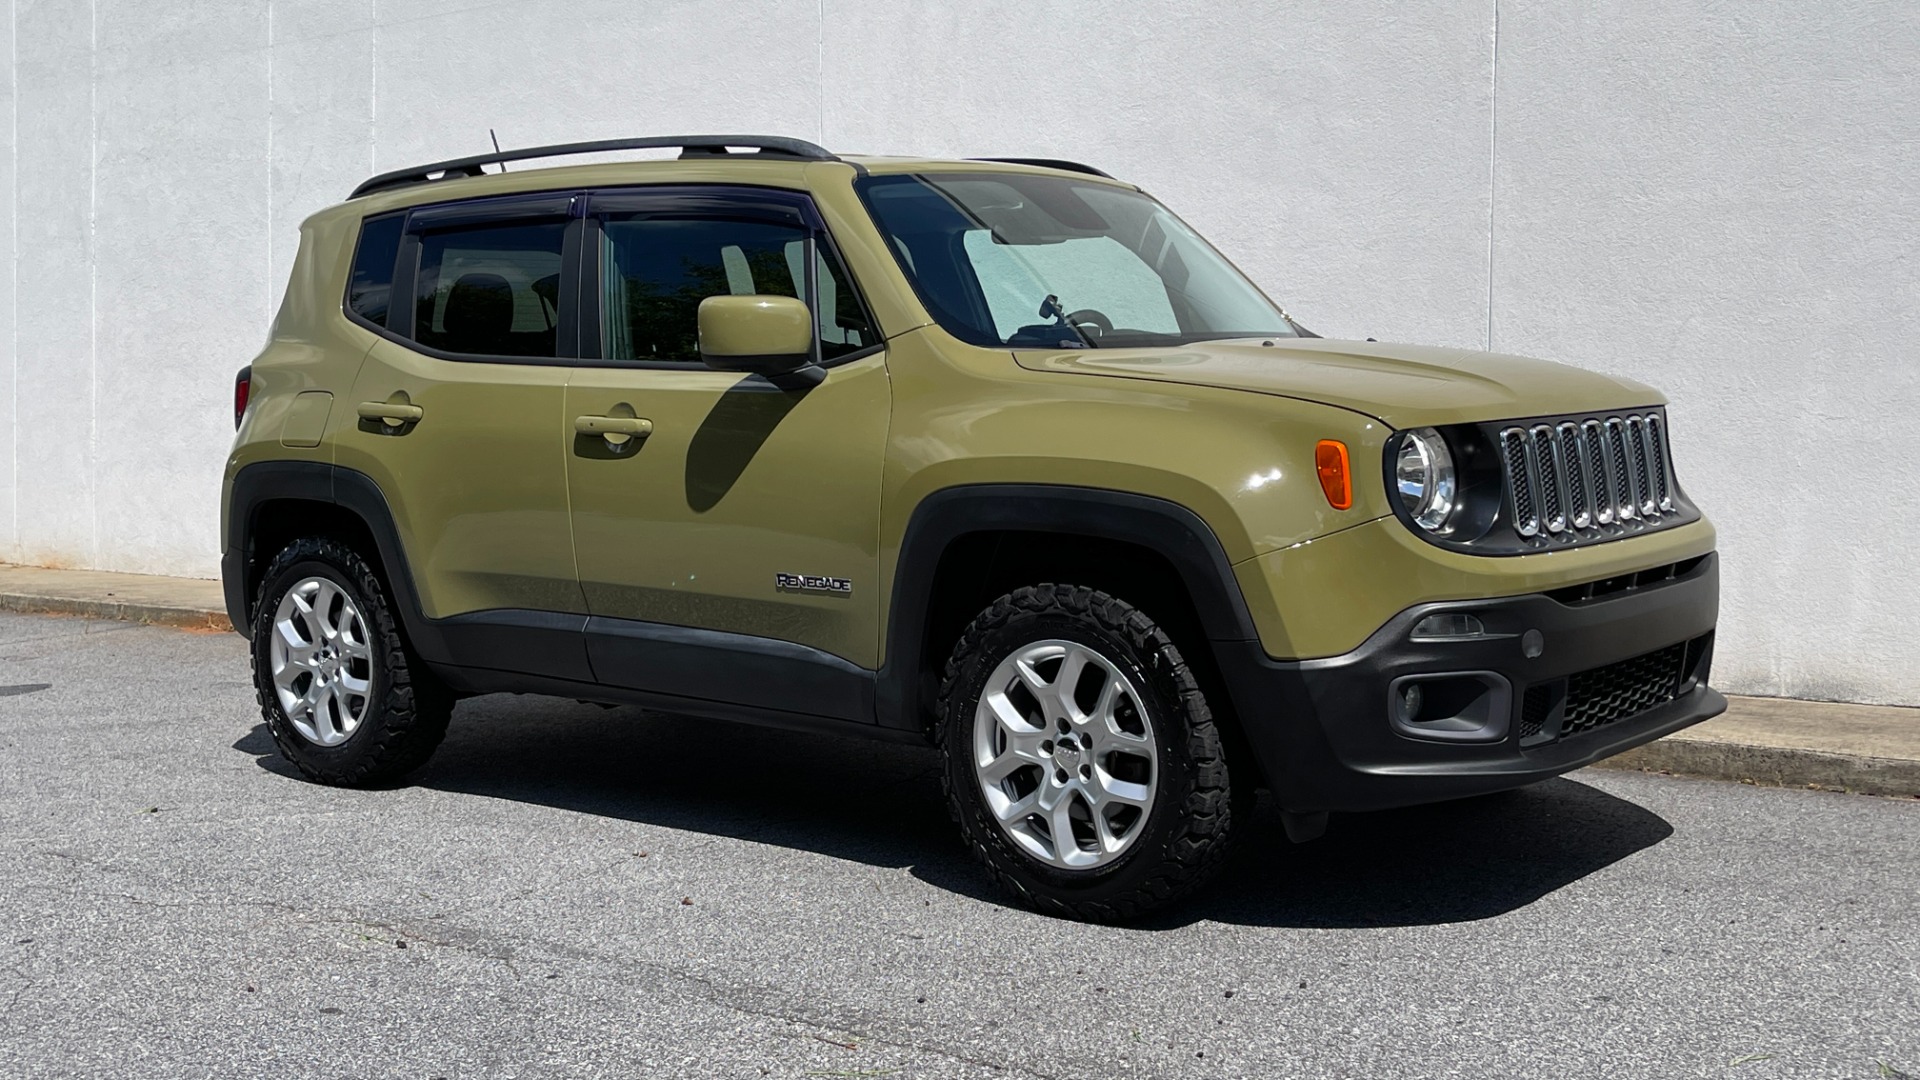 Used 2015 Jeep Renegade LATITUDE / 2.4L ENGINE / KEYLESS ENTRY / REMOTE START for sale $18,495 at Formula Imports in Charlotte NC 28227 5